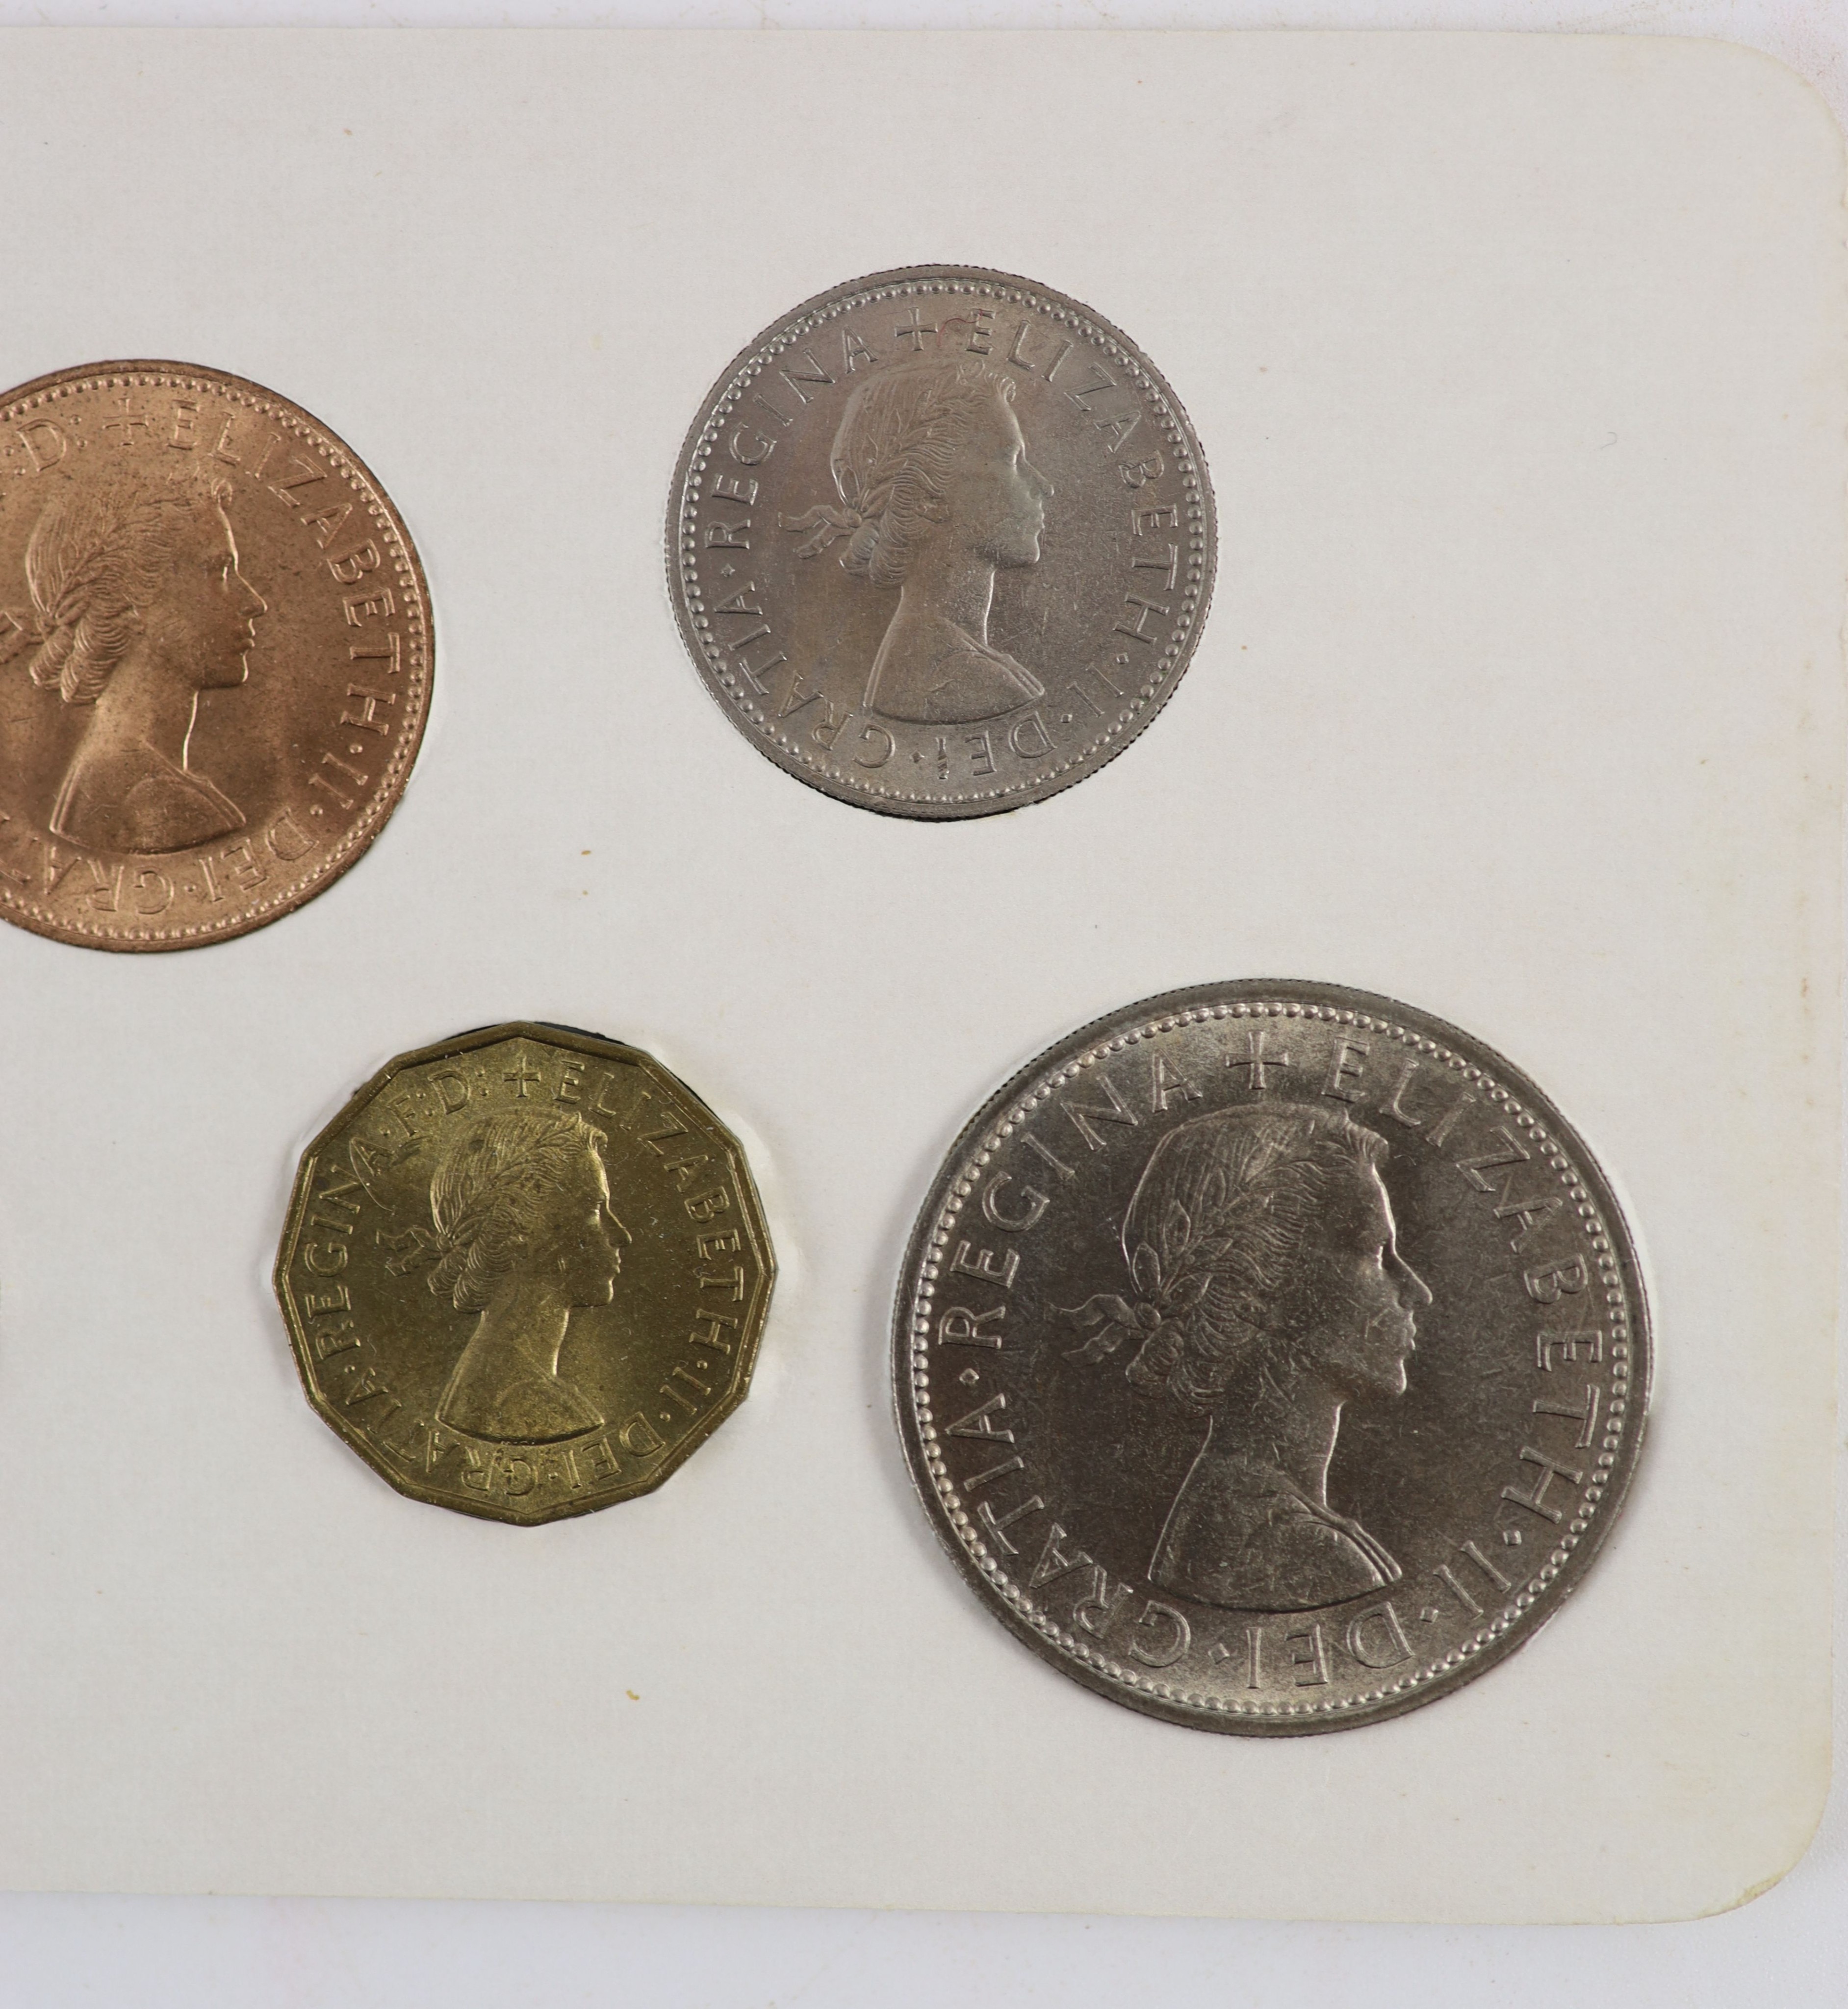 Queen Elizabeth II pre-decimal specimen coin sets for 1953 - 1967, first and second issues, all EF/ - Image 31 of 34